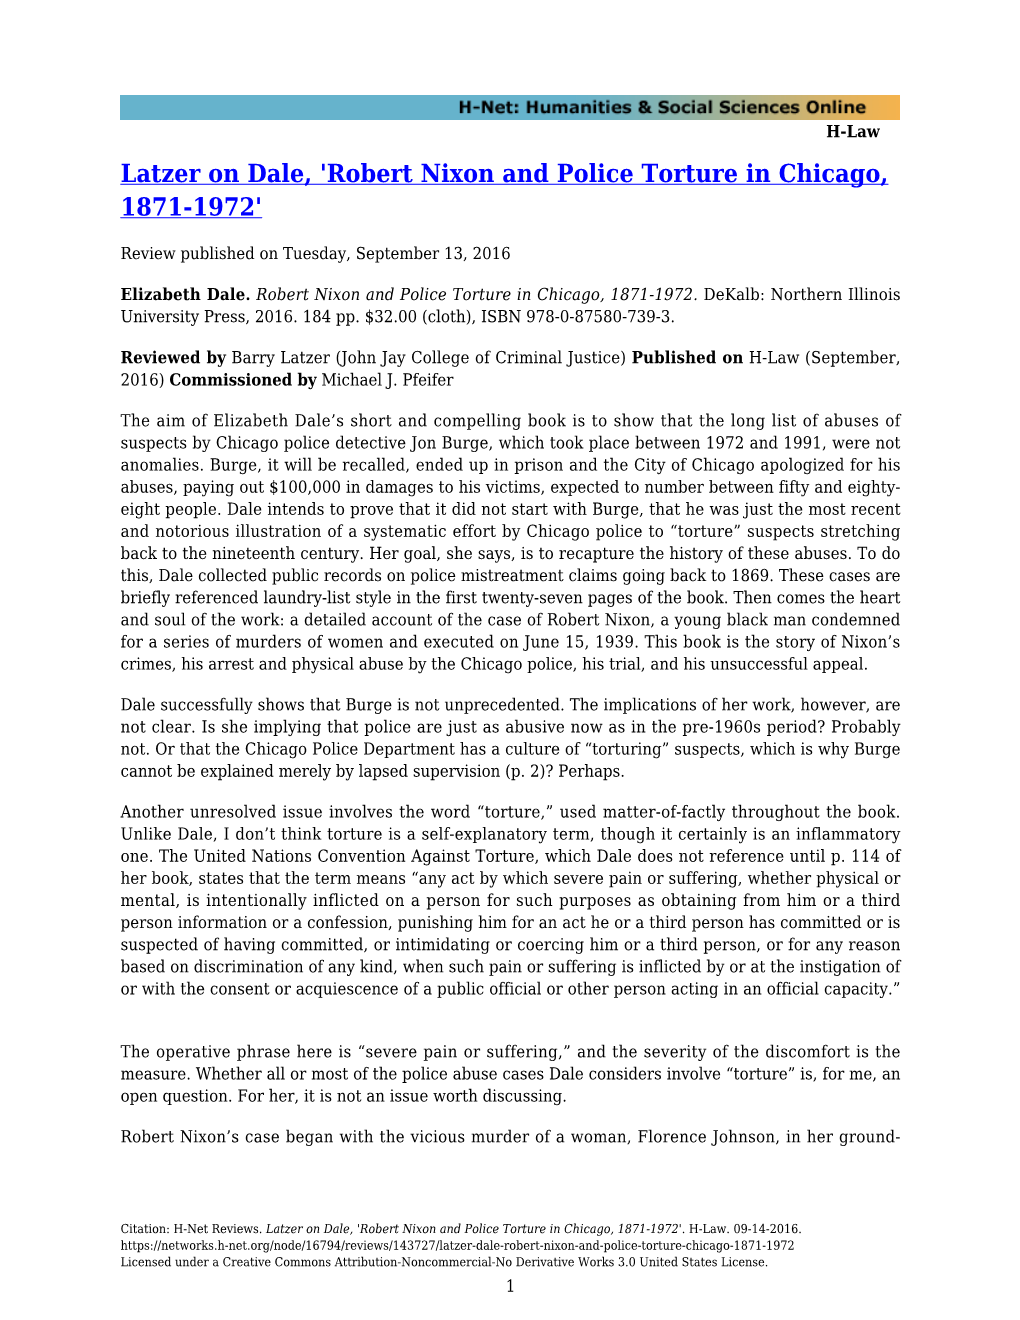 Latzer on Dale, 'Robert Nixon and Police Torture in Chicago, 1871-1972'